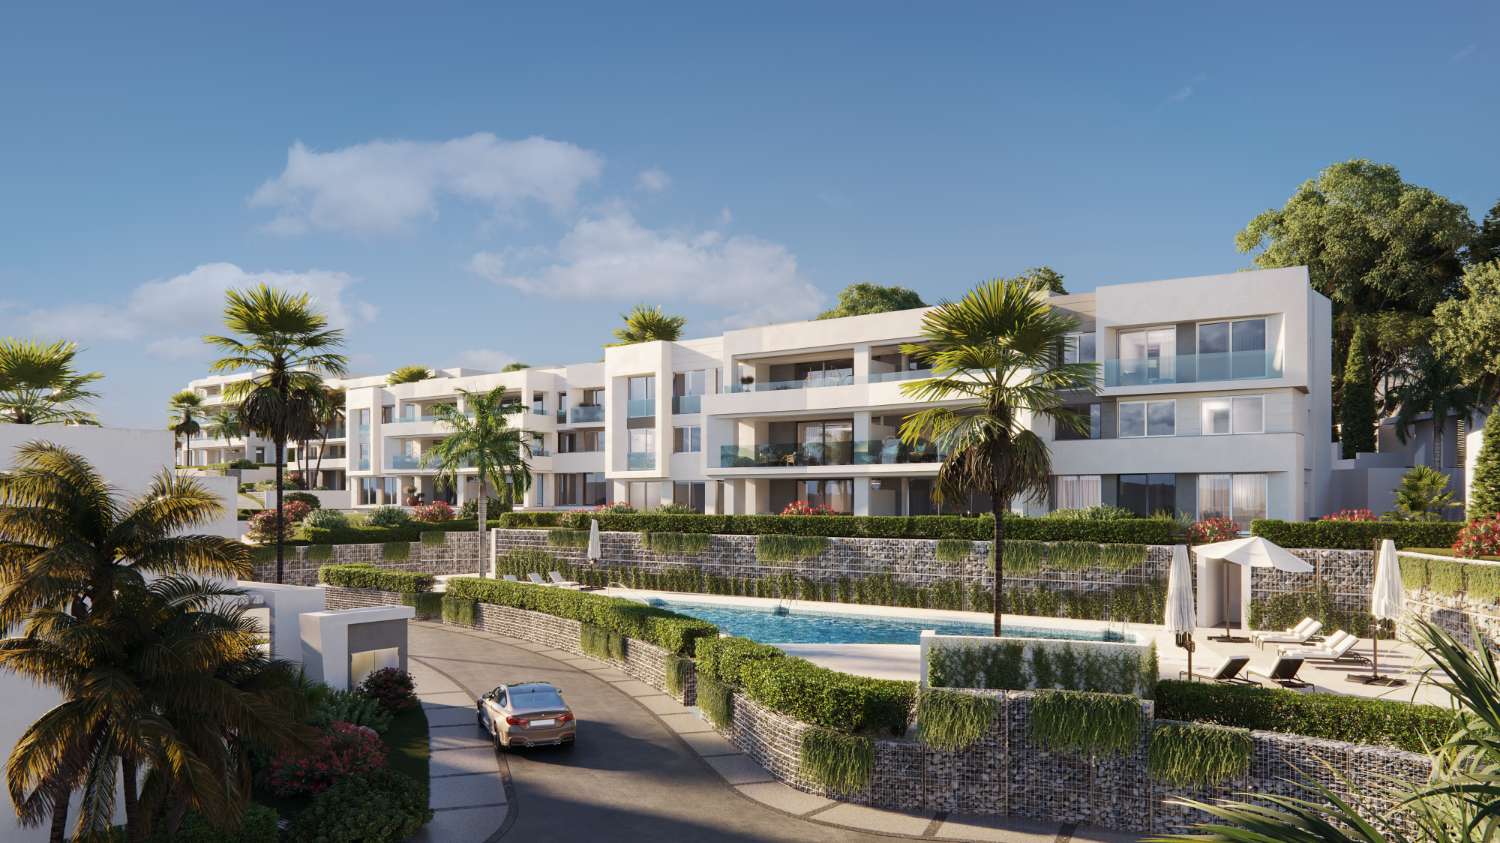 Spacious and exclusive four bedroom apartment with private garden of 221 m2 in Resort in Marbella, on the first line of the golf course